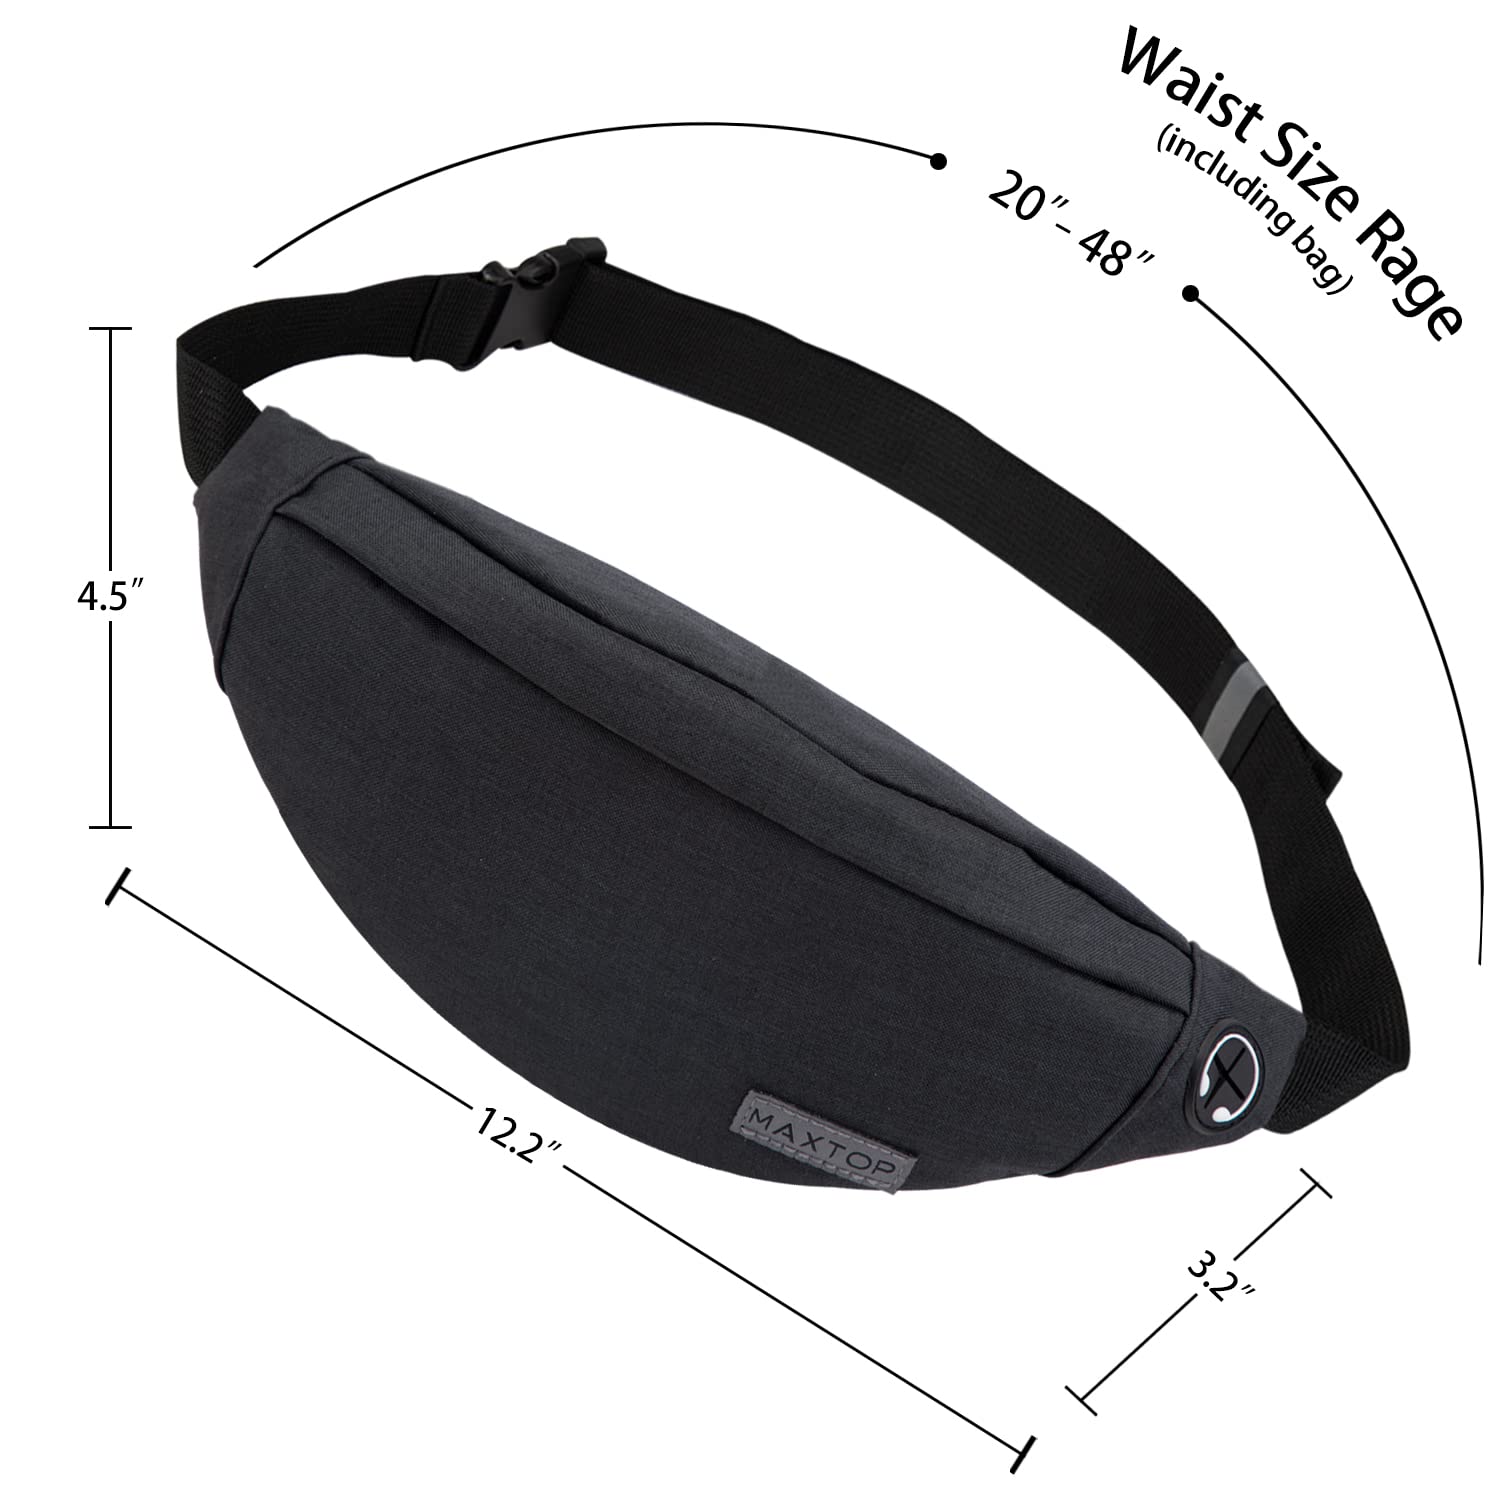 MAXTOP Fanny Pack for Men Women Waist Pack Bag with Headphone Jack and 3-Zipper Pockets Adjustable Straps